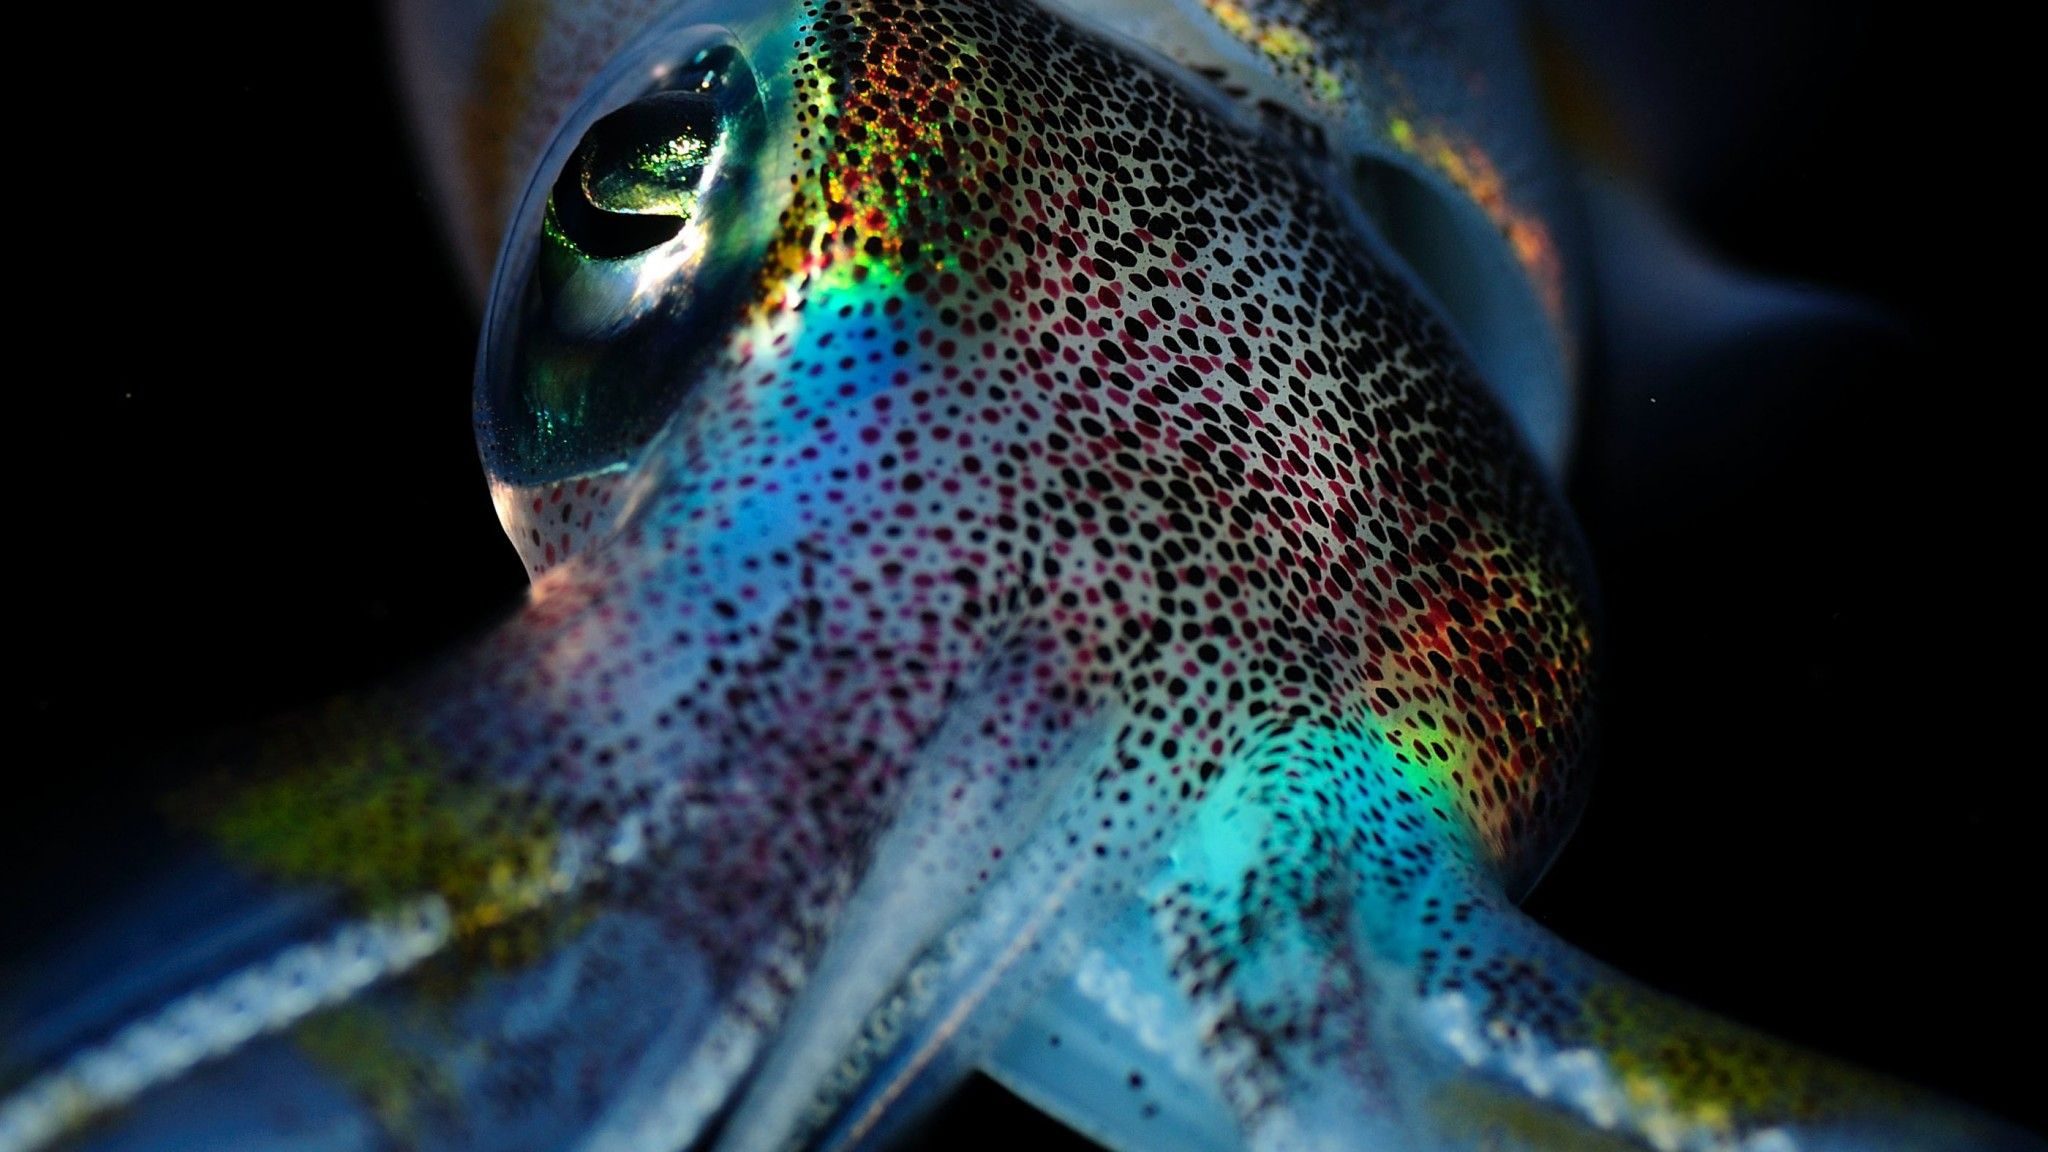 2048x1152 Awesome Squid wallpaper | | #11490 | Squid games, Wallpaper, Animals beautiful